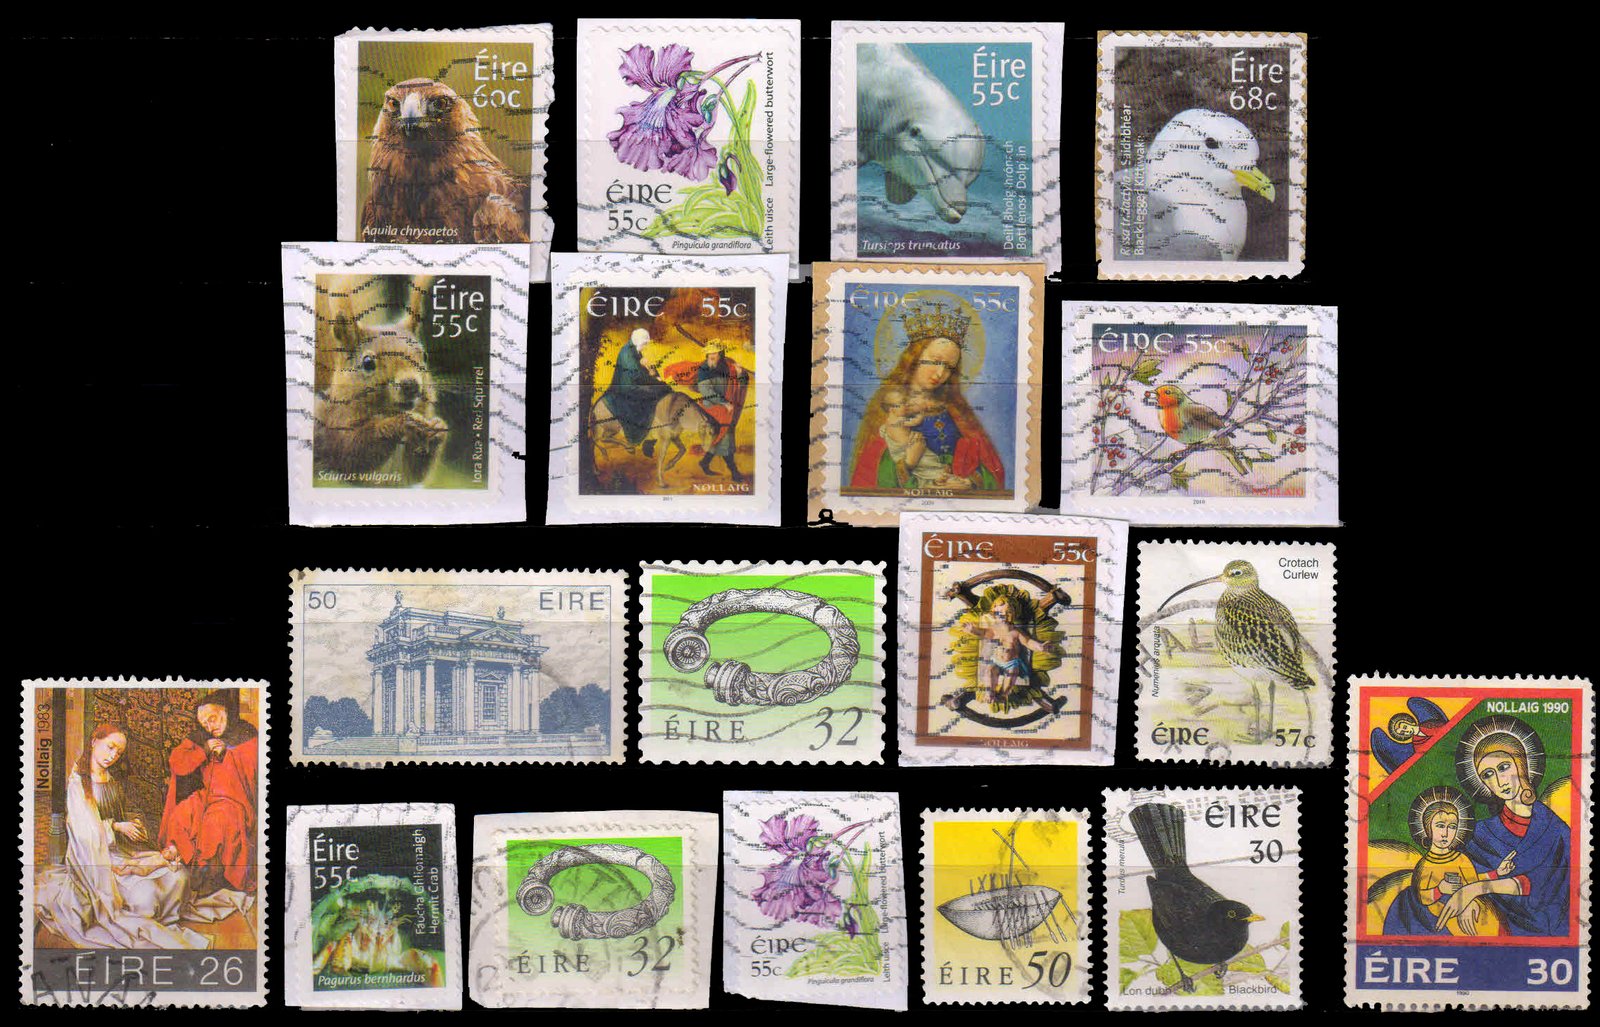 IRELAND-20 Different Used Postage Stamps, Large & Small